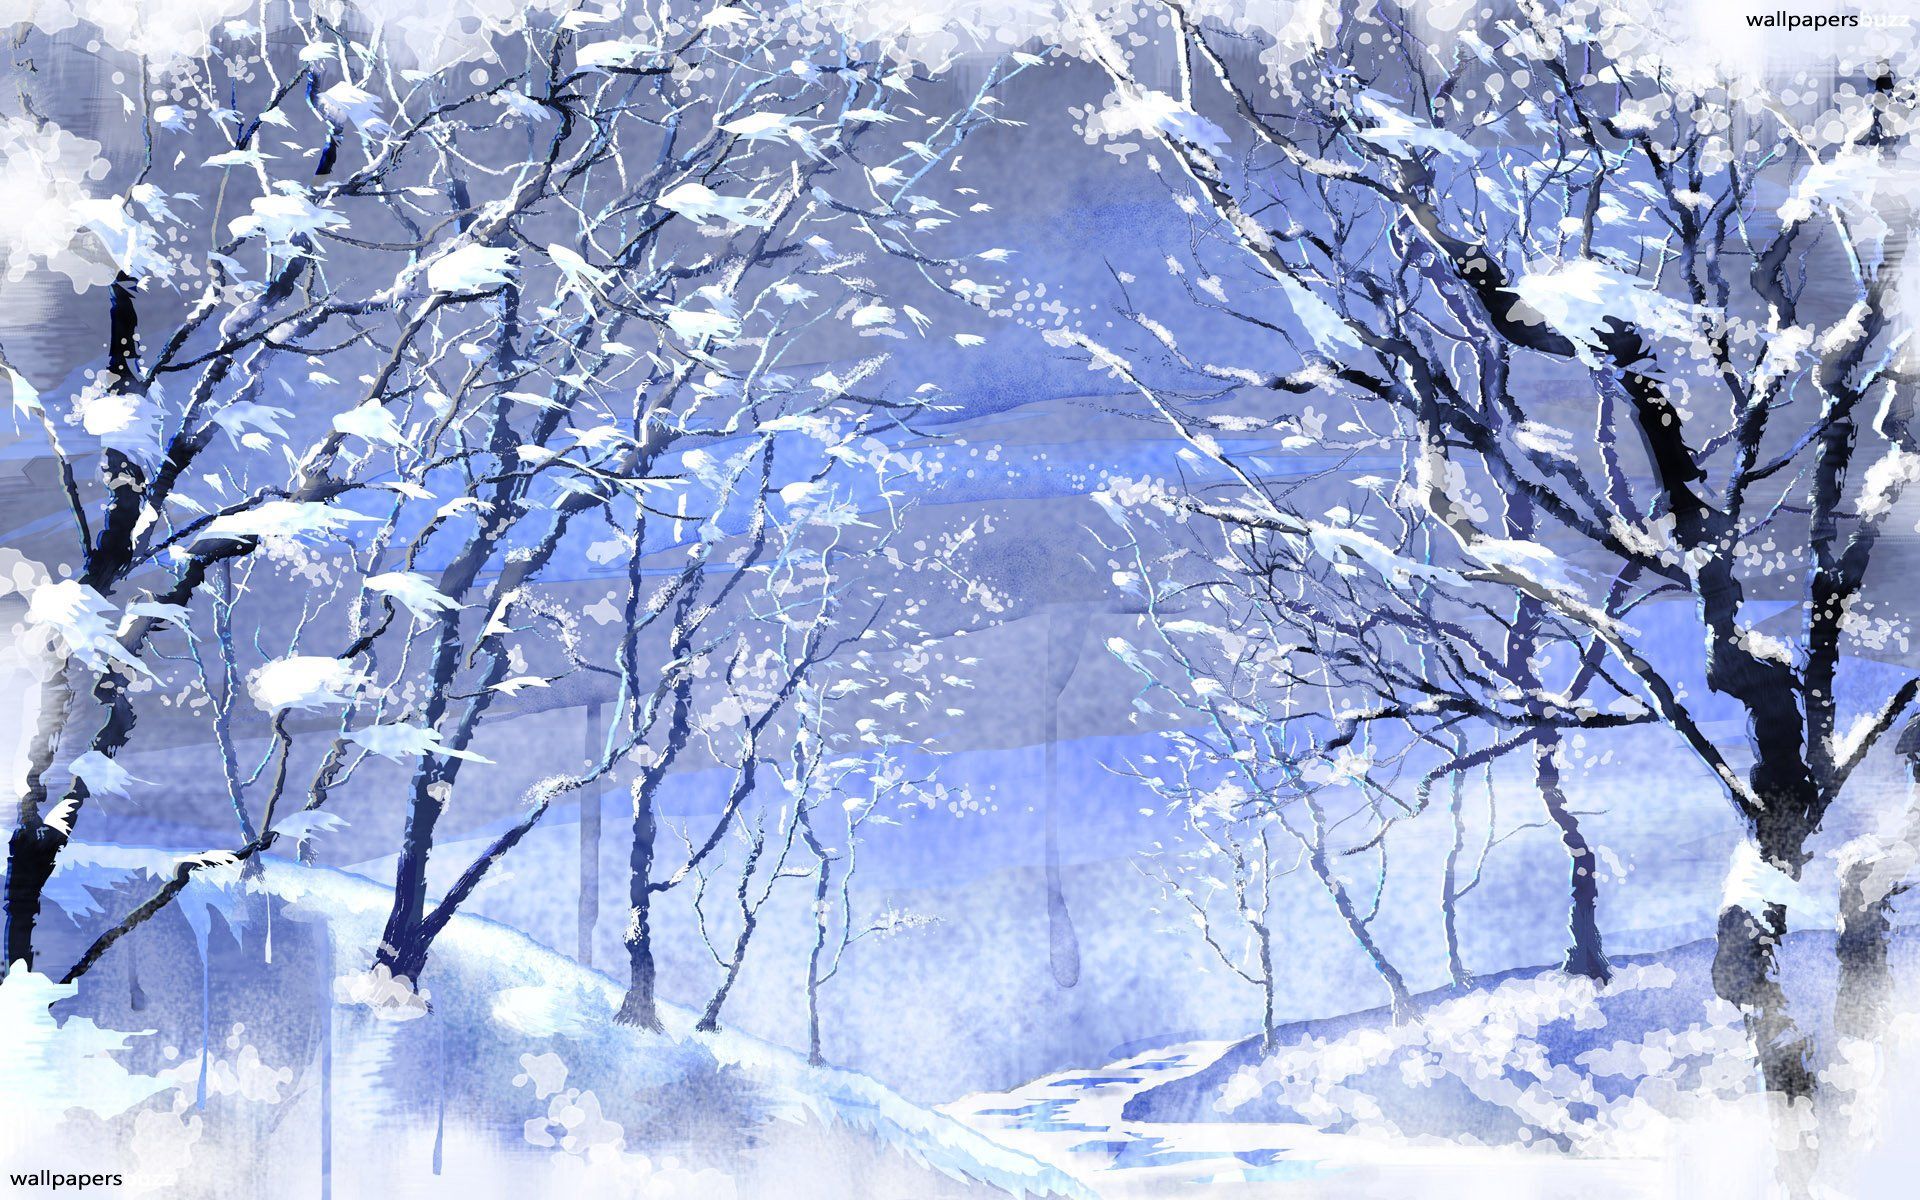 Snowfall Background Images, HD Pictures and Wallpaper For Free Download |  Pngtree